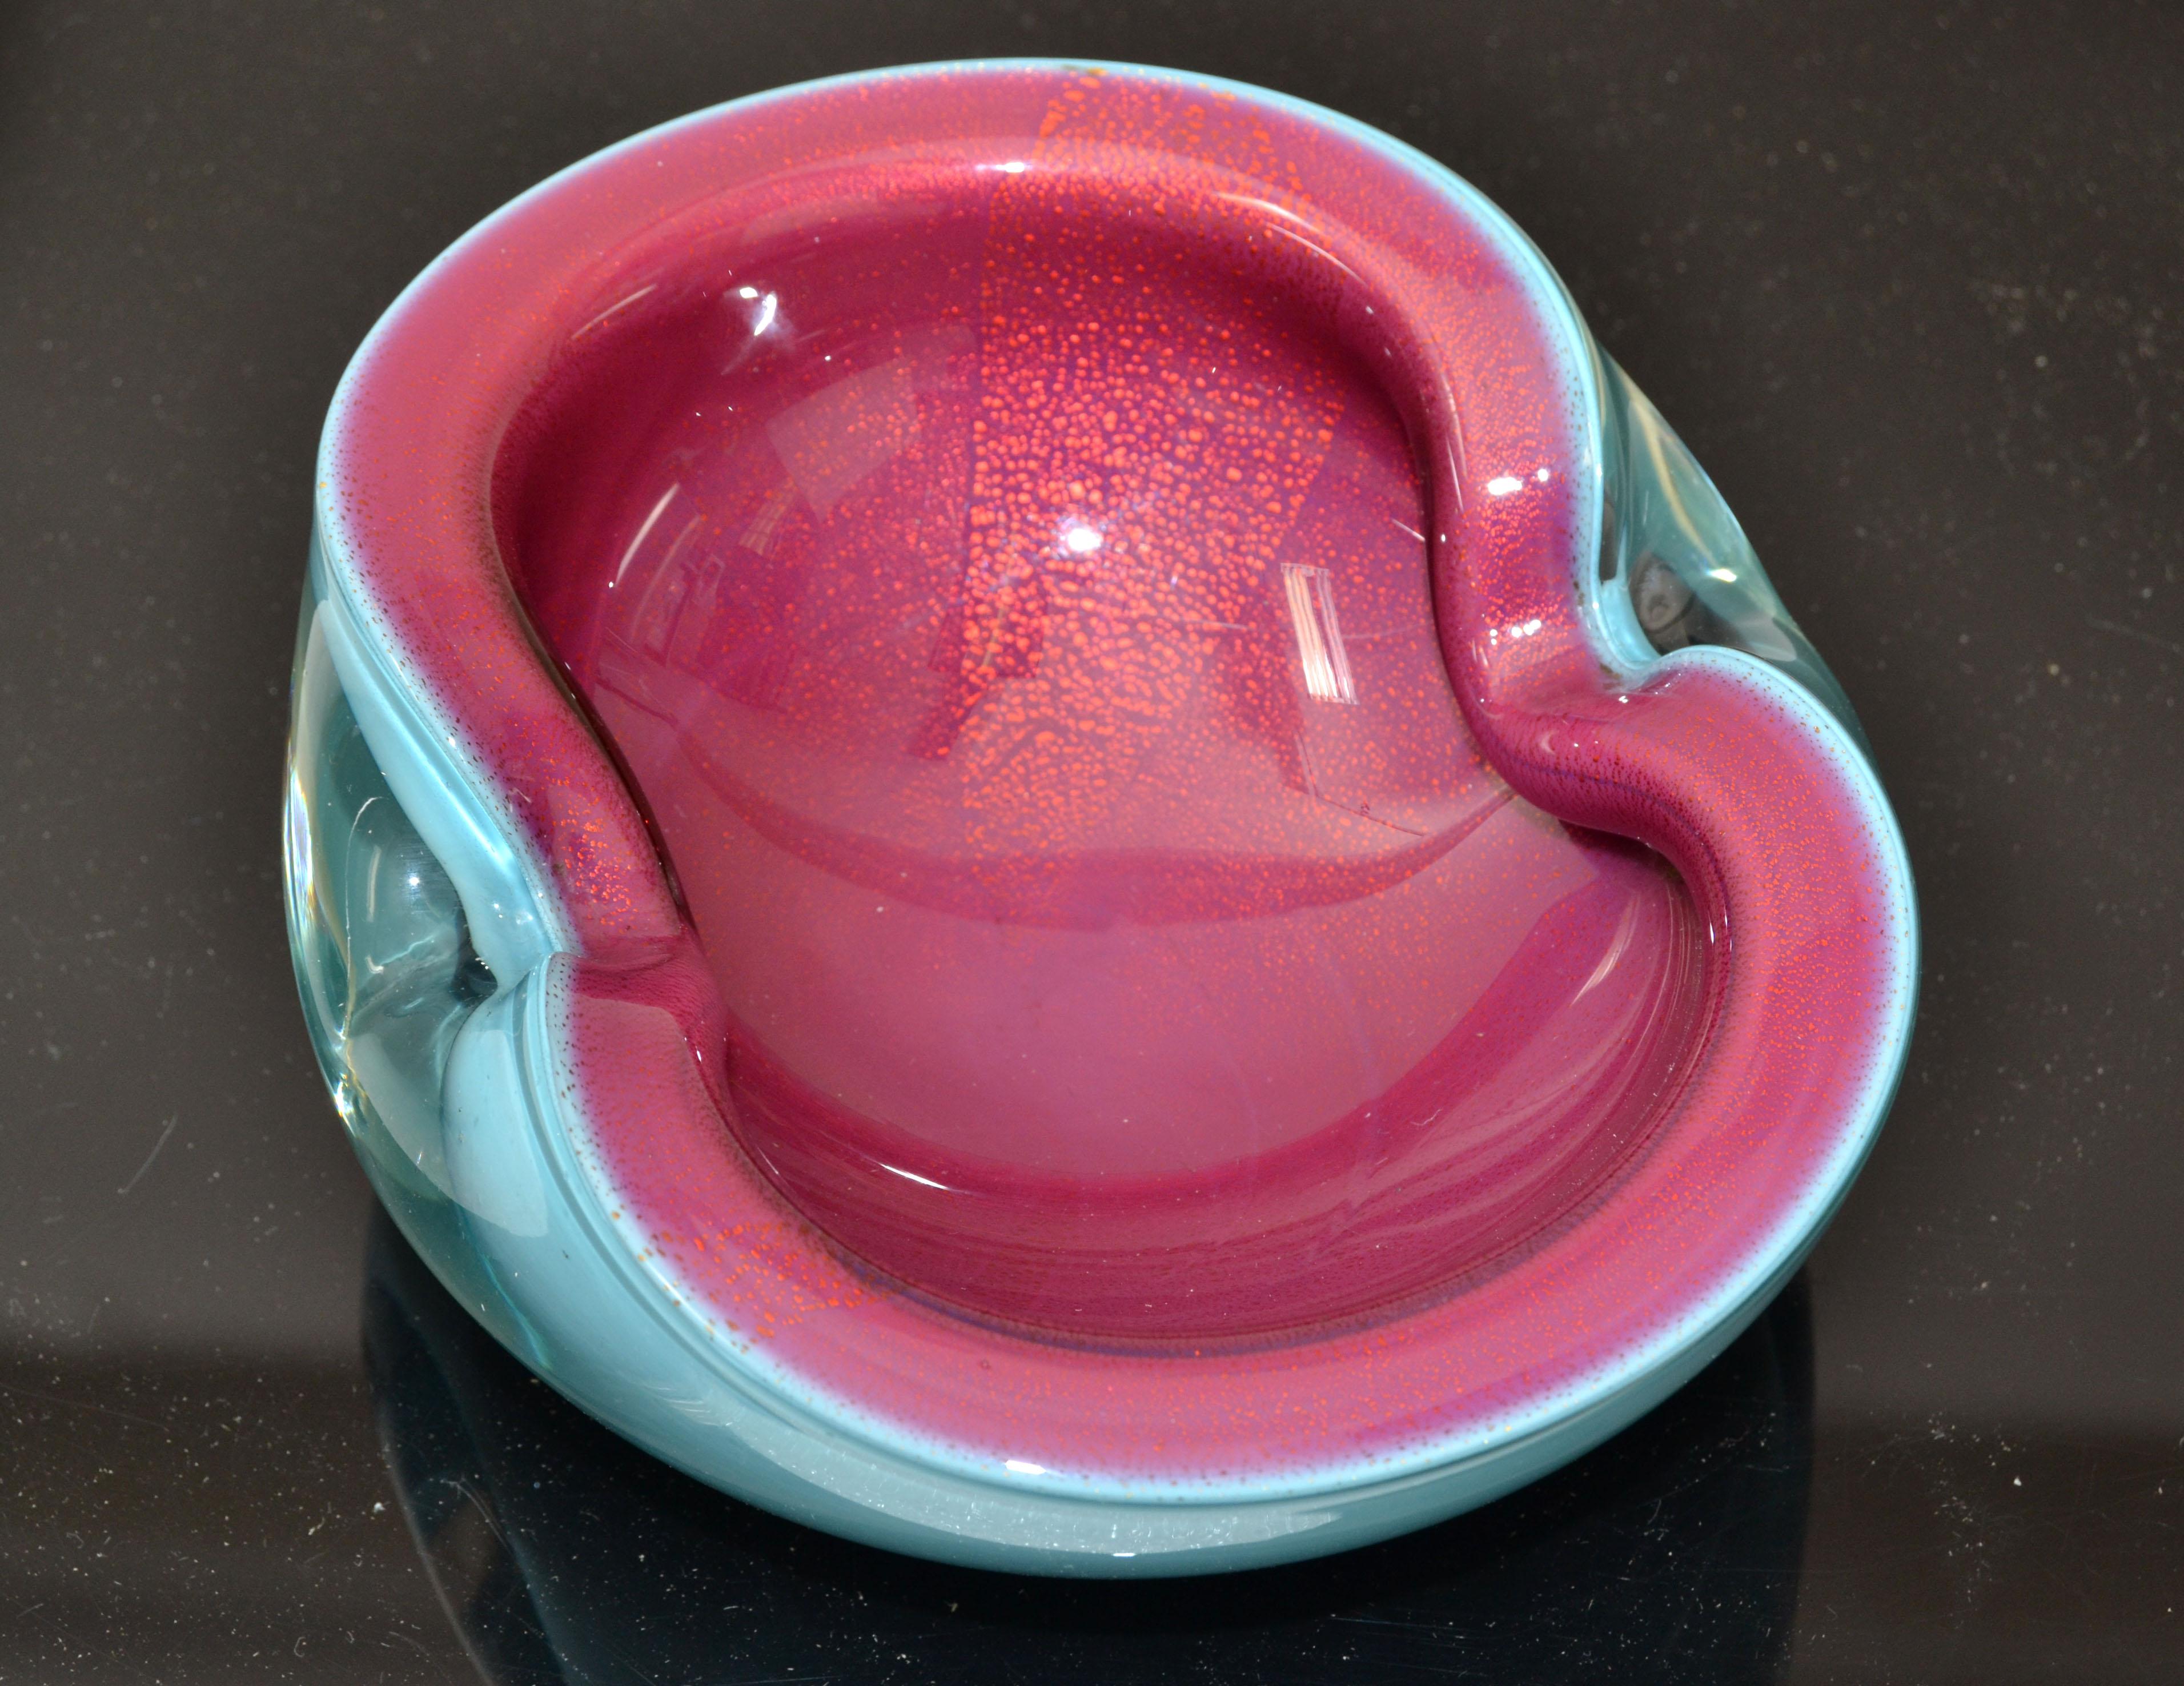 Murano blown art glass bowl in turquoise blue, raspberry and Gold dusted glass designed by Alfredo Barbini in Italy.
Mid-Century Modern triple cased unique glass art very elegant and practical.